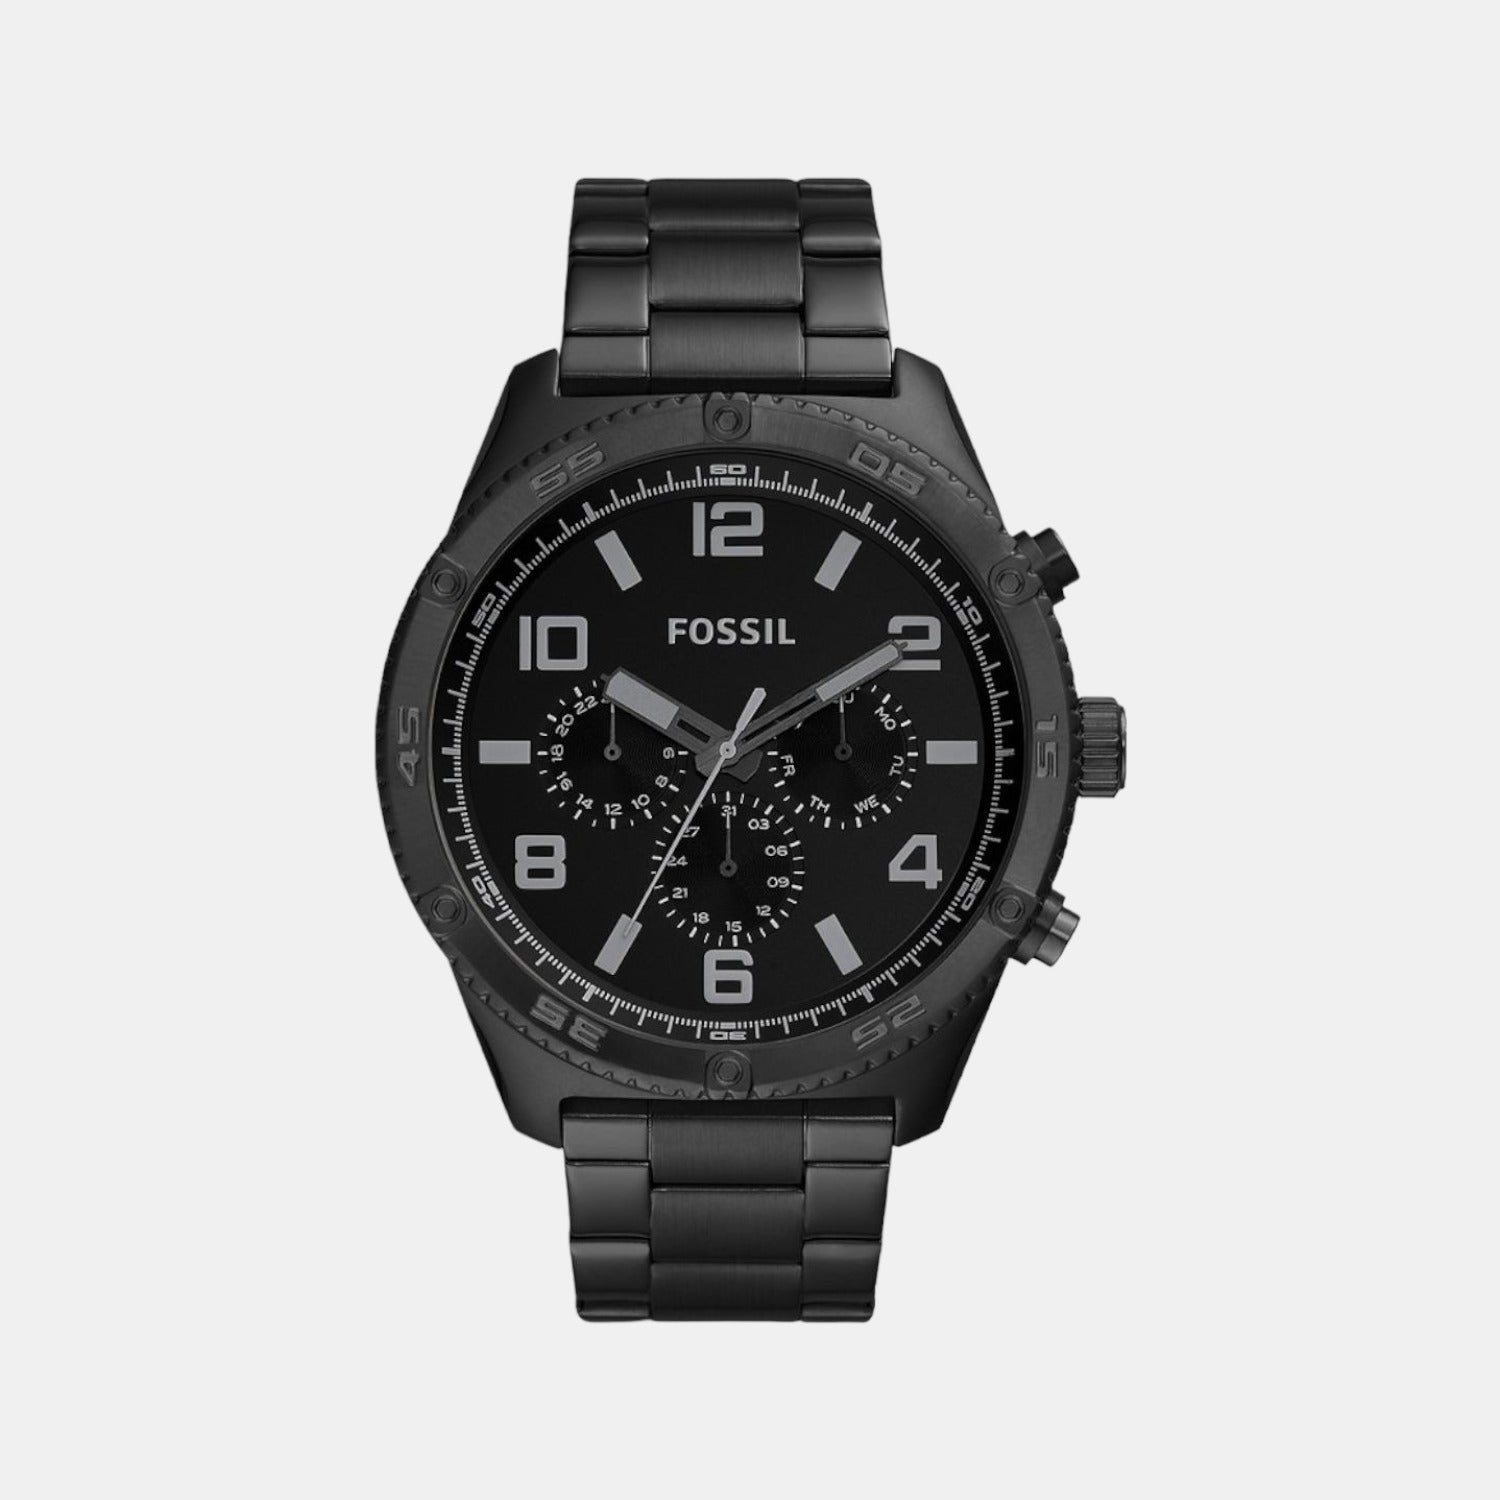 Fossil Men's Machine Stainless Steel Chronograph Watch